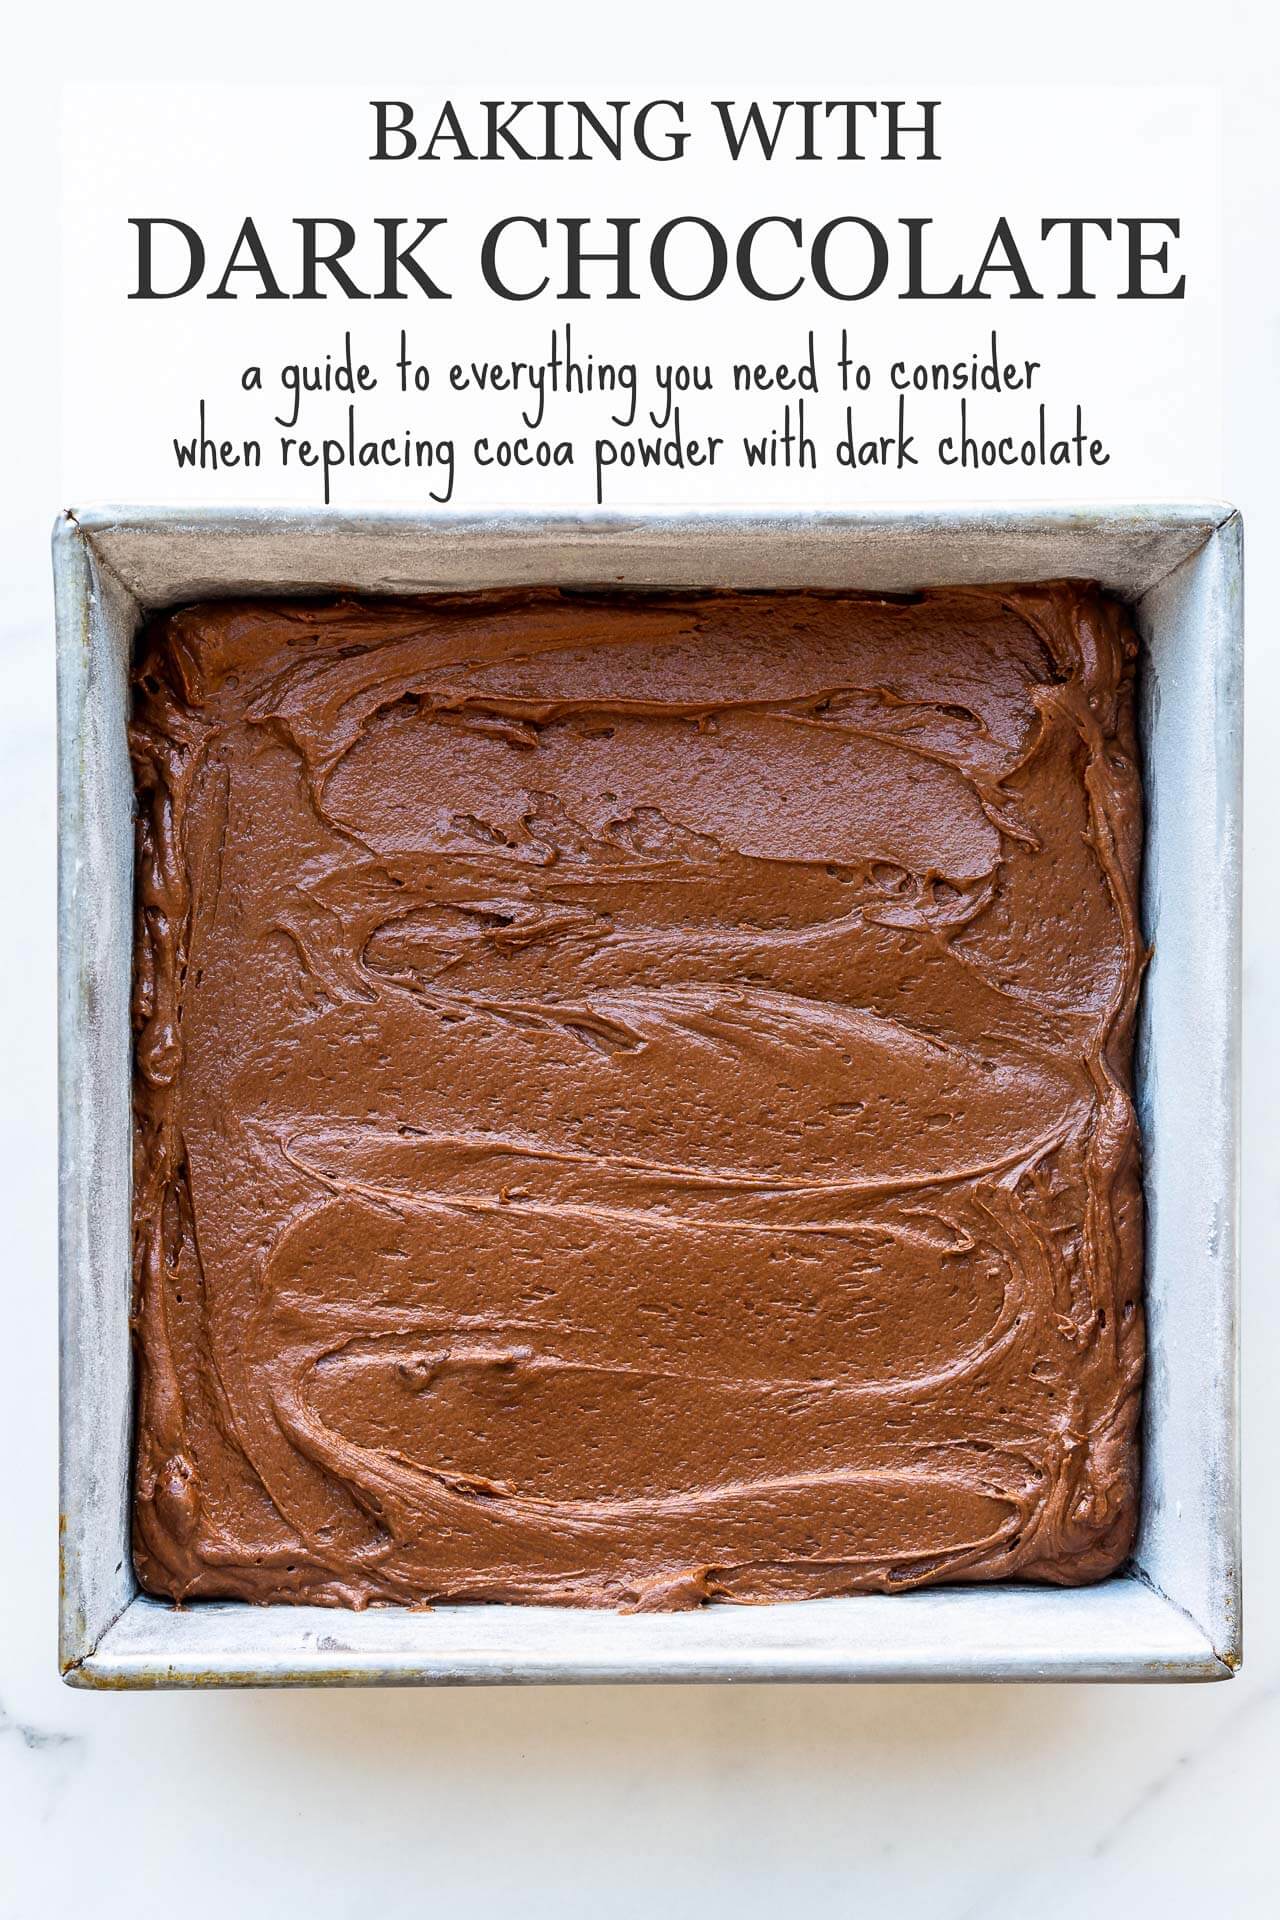 A square cake pan filled with chocolate cake batter that has been swirled